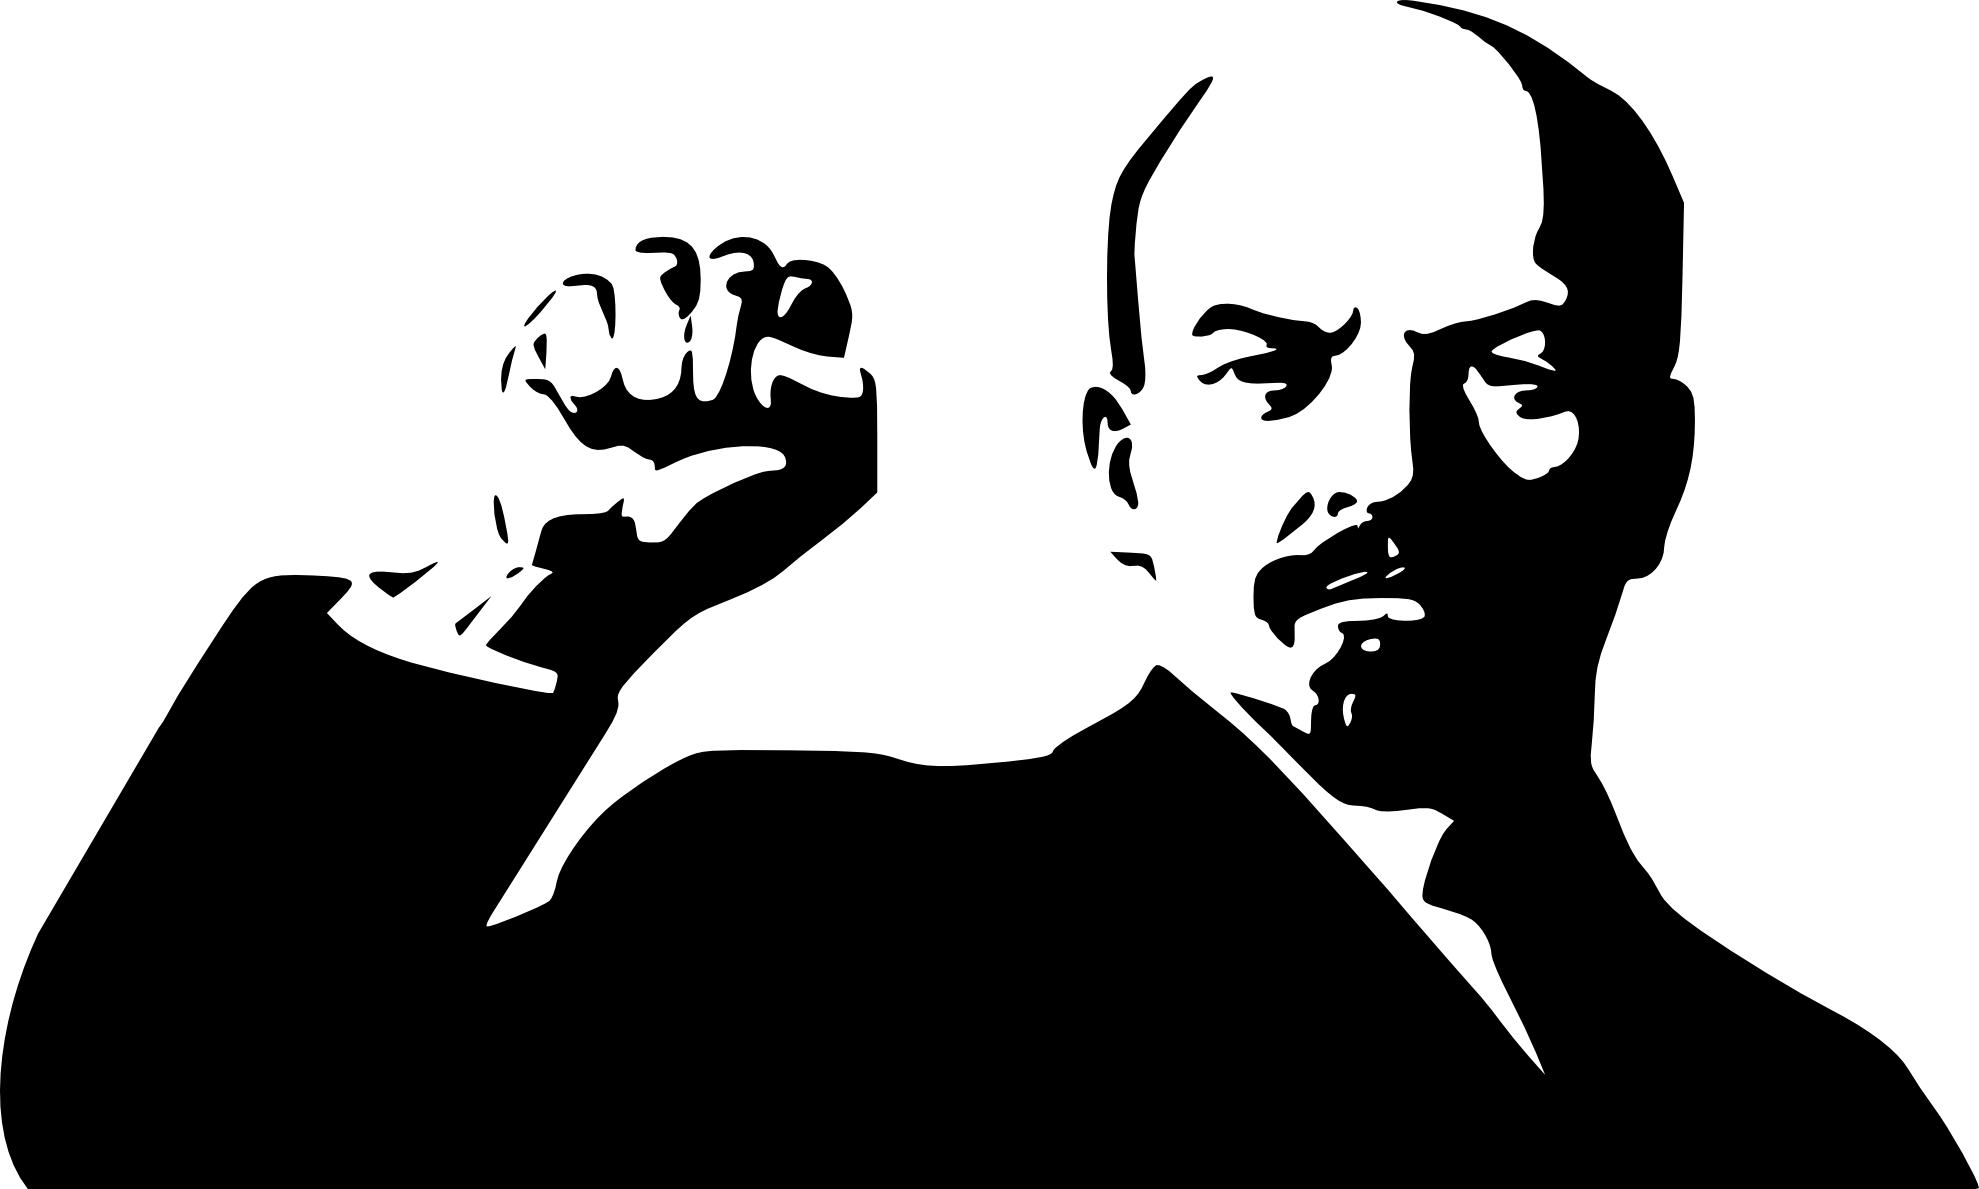 Democracy clipart revolution fist. The difference between and